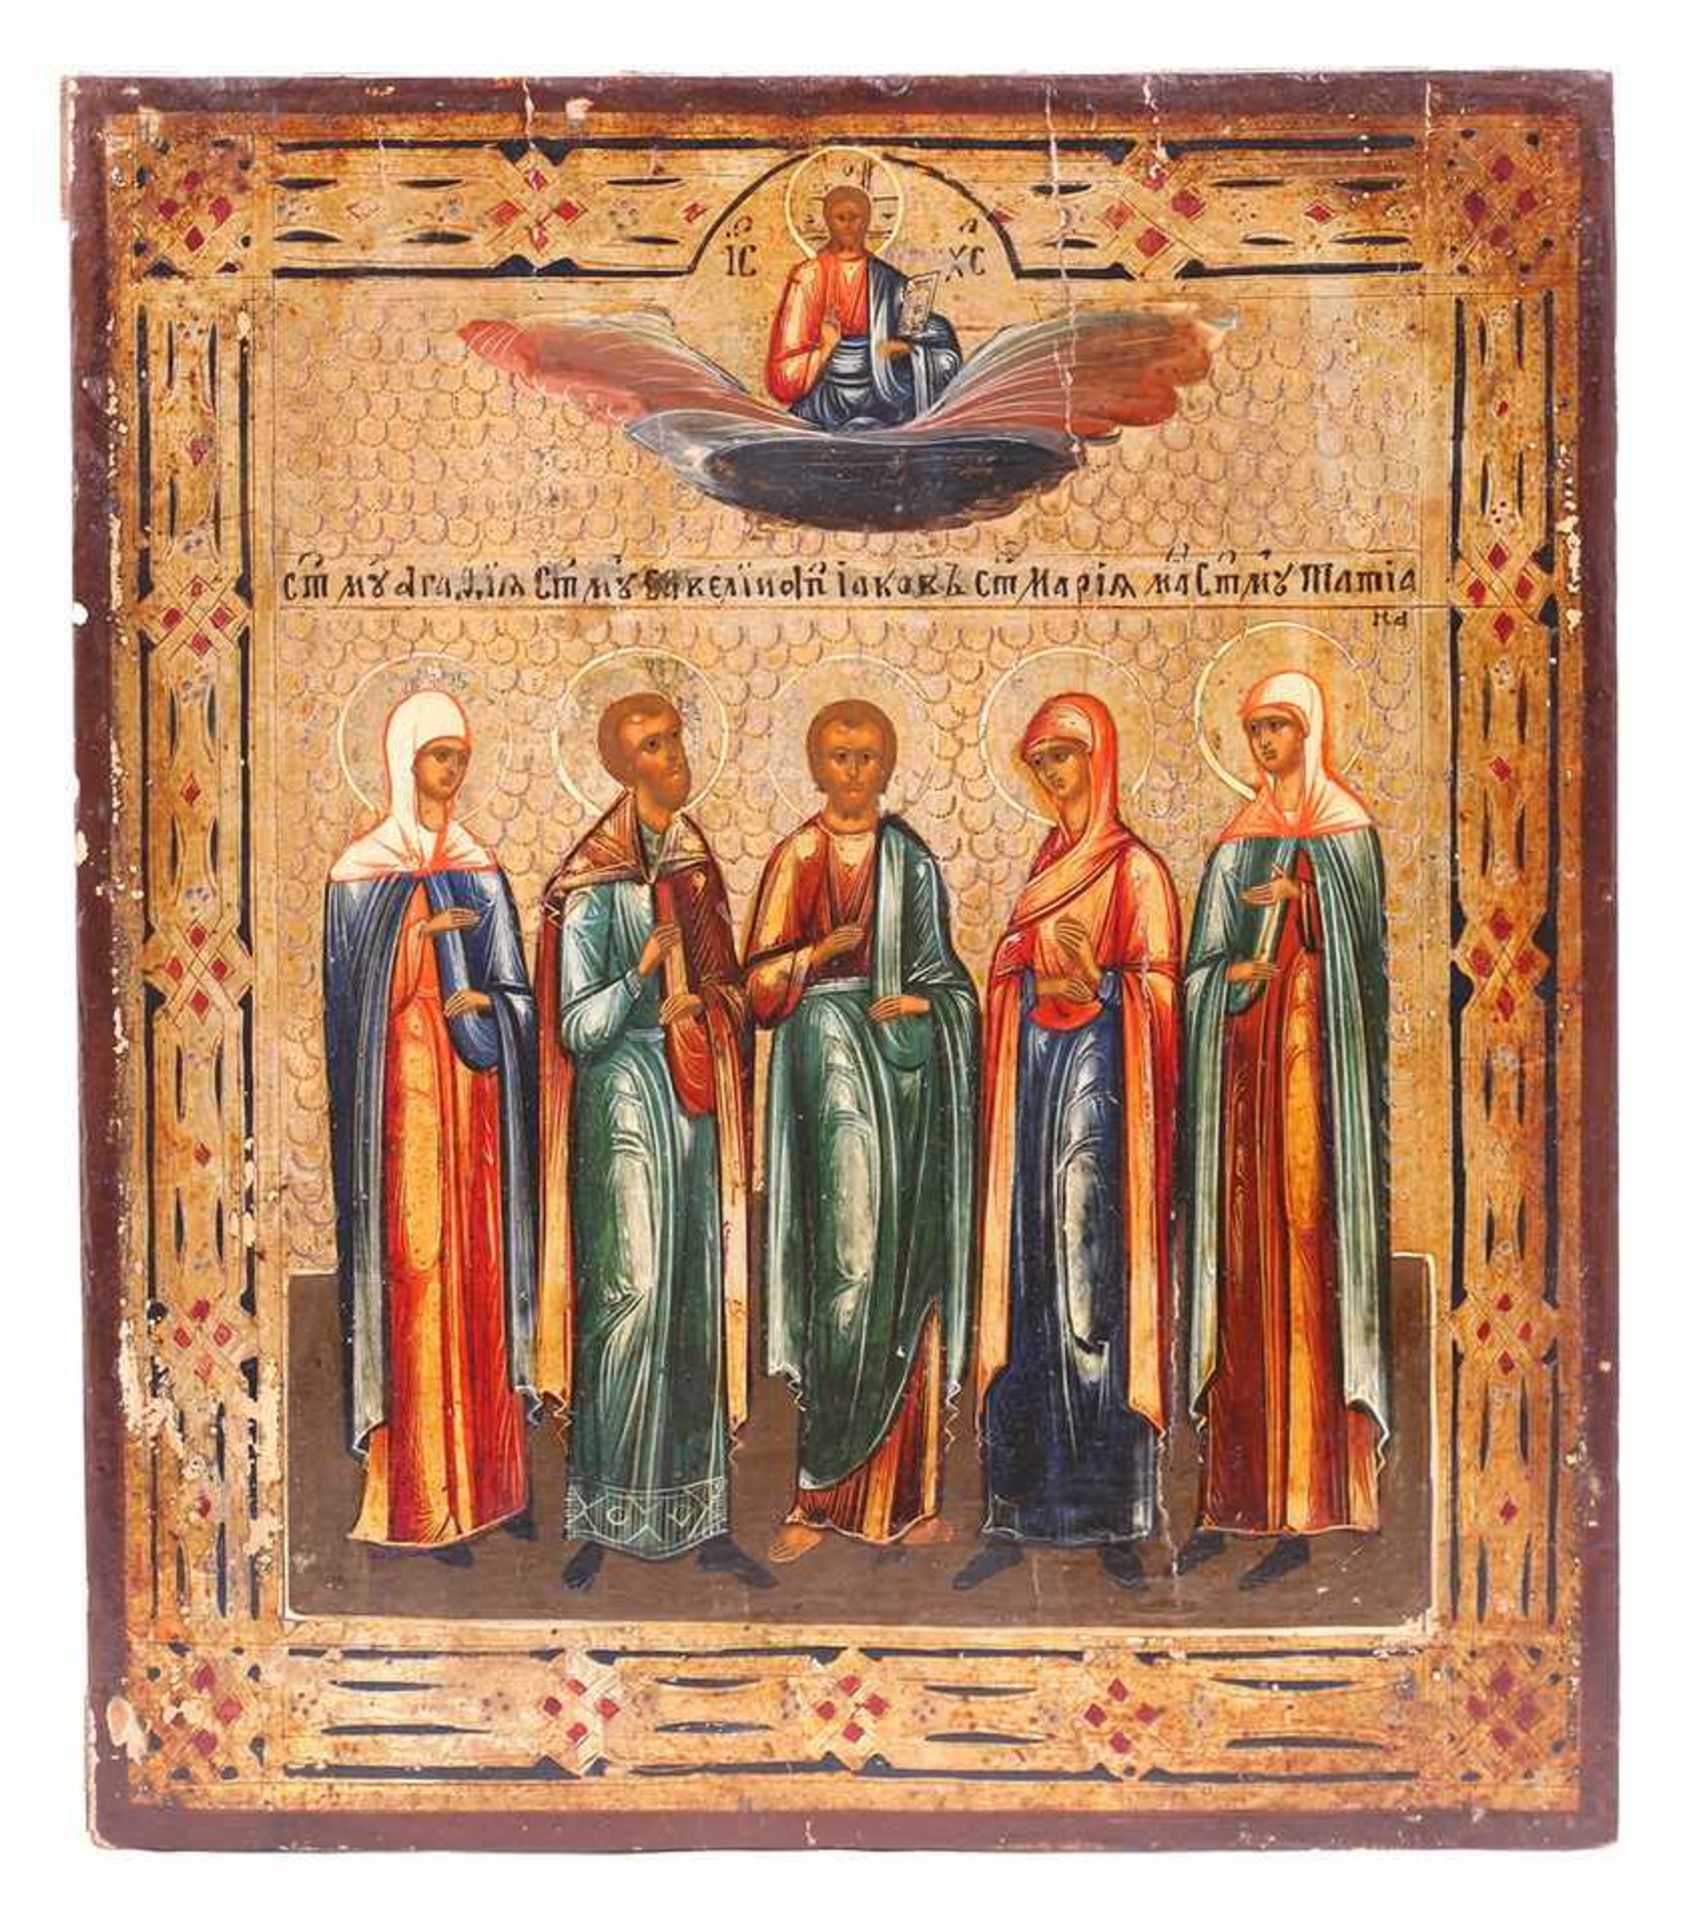 Russian icon "Selected saints: St. Agatha, St. Savely, St James the Great, St. Mary Magdalene, St.